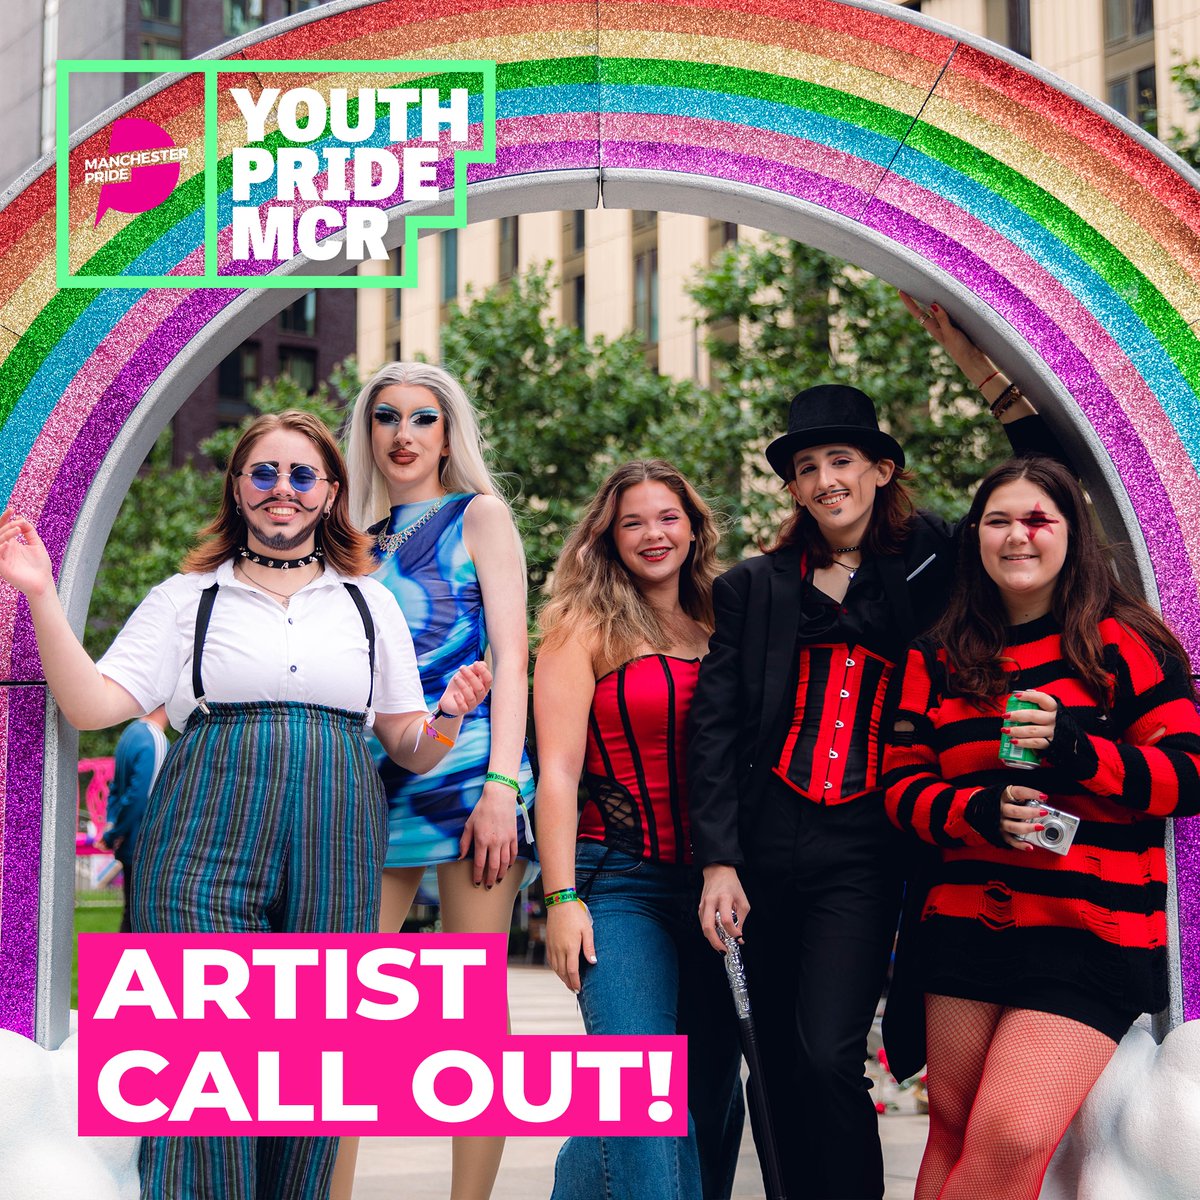 If you're a performance artist aged 14-18, we want YOU to bring your magic to our stage at Youth Pride MCR 2024! 🪩 It's a fab opportunity to meet others, connect with MCR's LGBTQ+ performer scene, and showcase your unique flair! 🎊🏳️‍🌈🏳️‍⚧️ INFO & APPLY: bit.ly/43J4QHm ✨